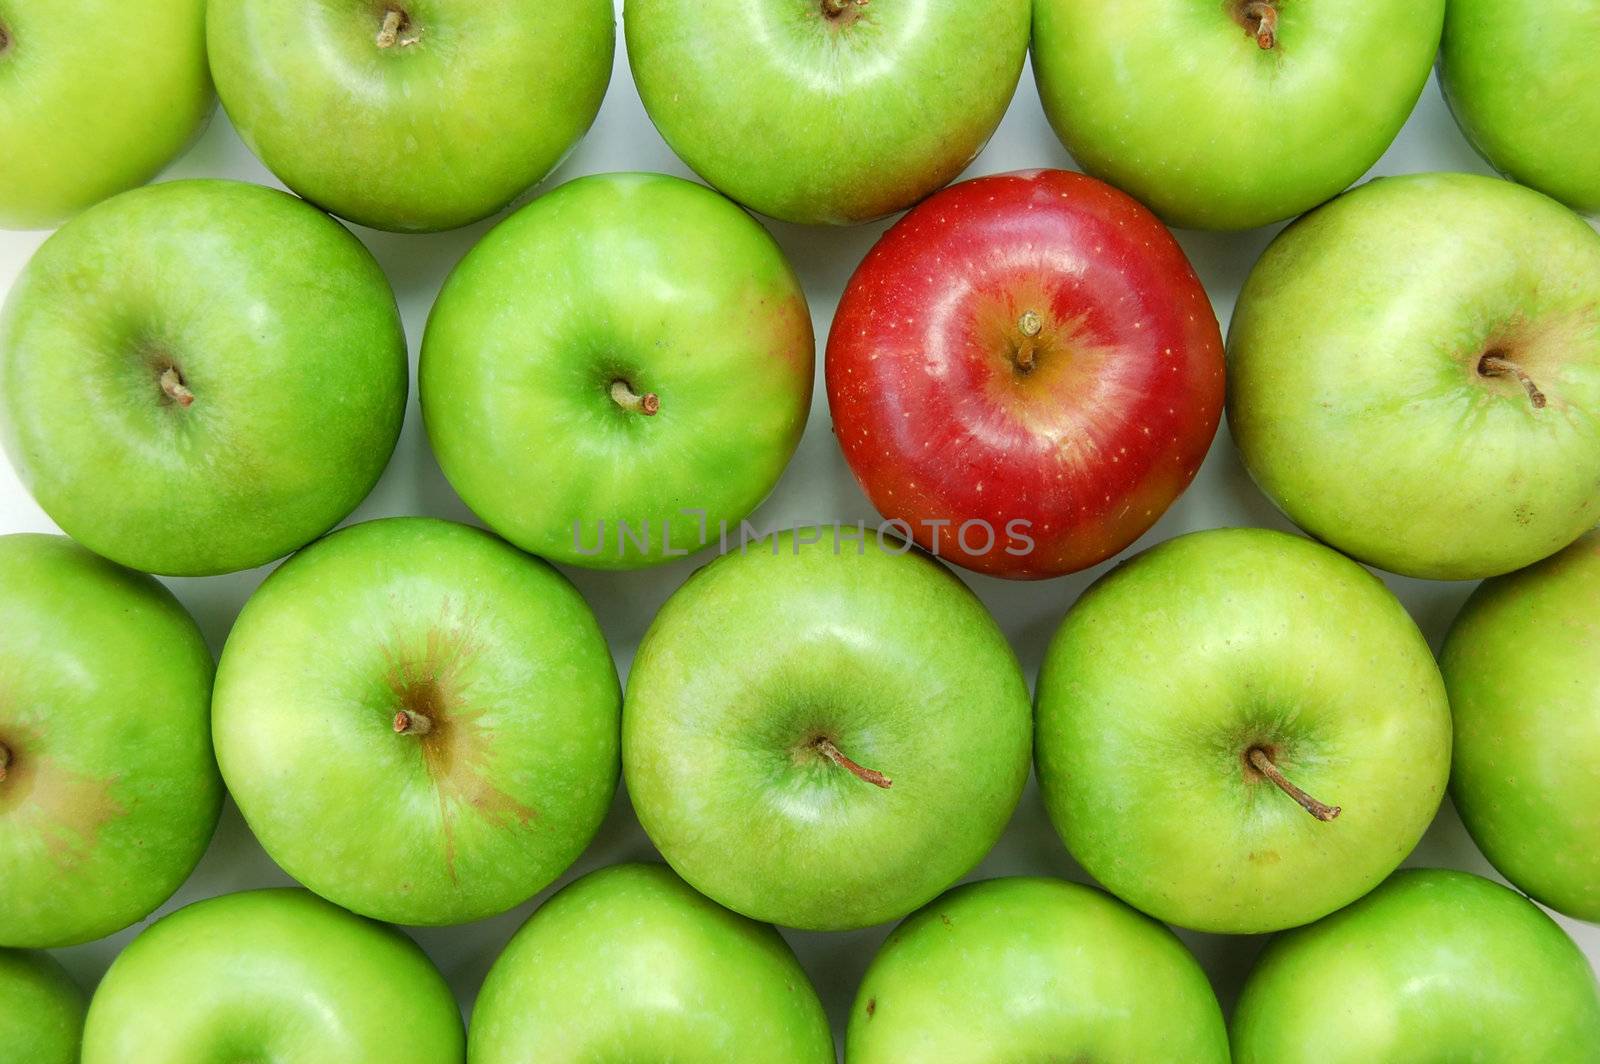 Red apple amongst many green ones